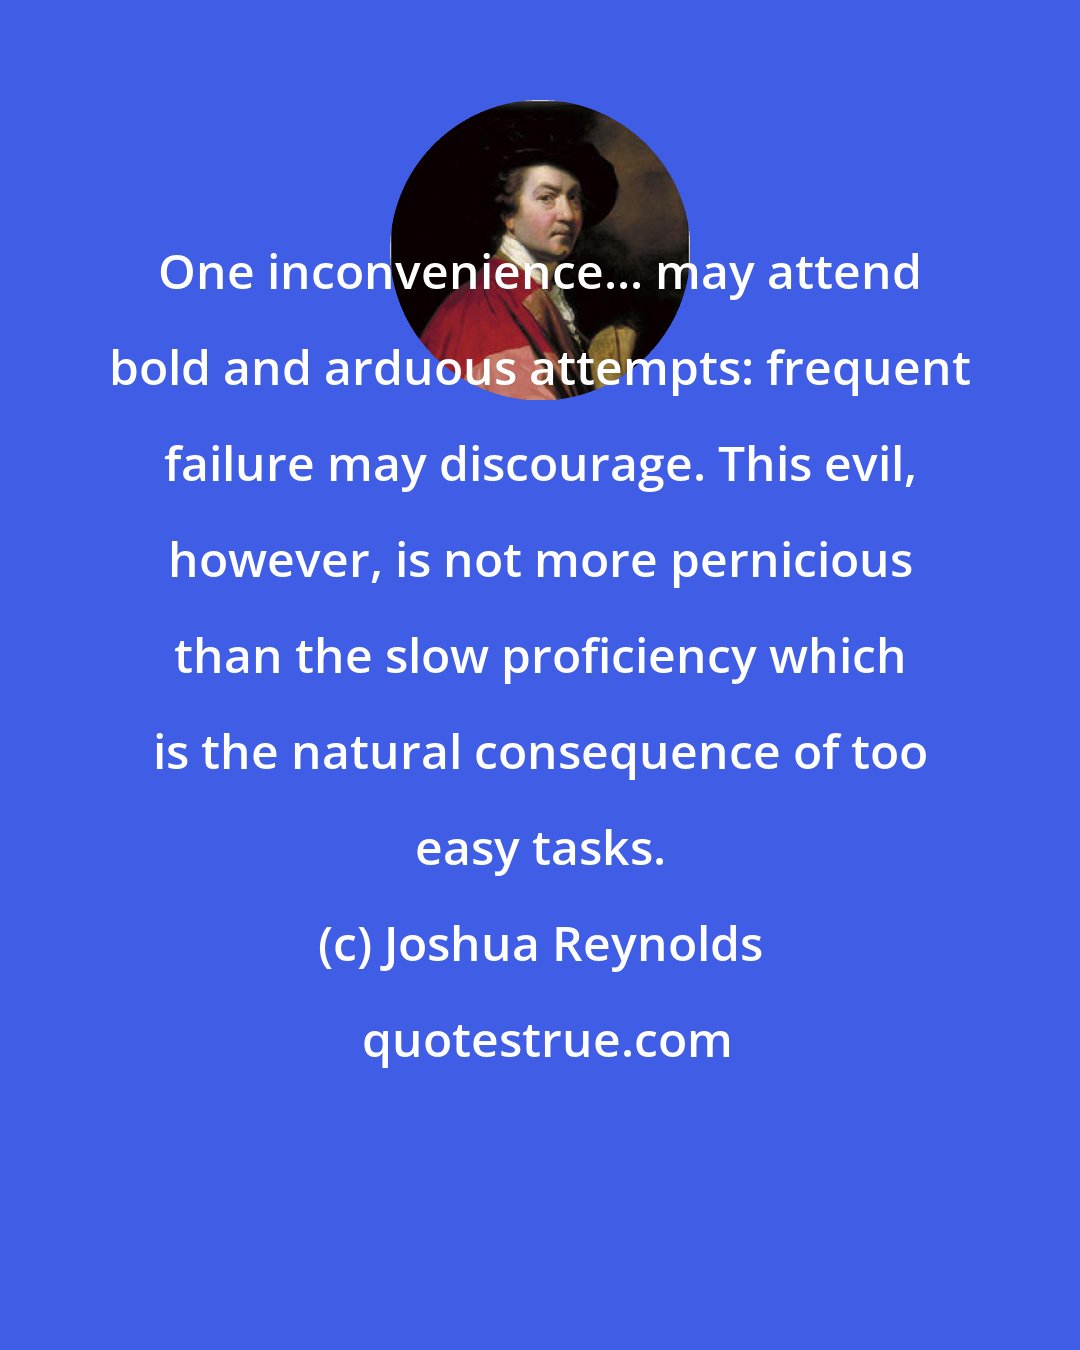 Joshua Reynolds: One inconvenience... may attend bold and arduous attempts: frequent failure may discourage. This evil, however, is not more pernicious than the slow proficiency which is the natural consequence of too easy tasks.